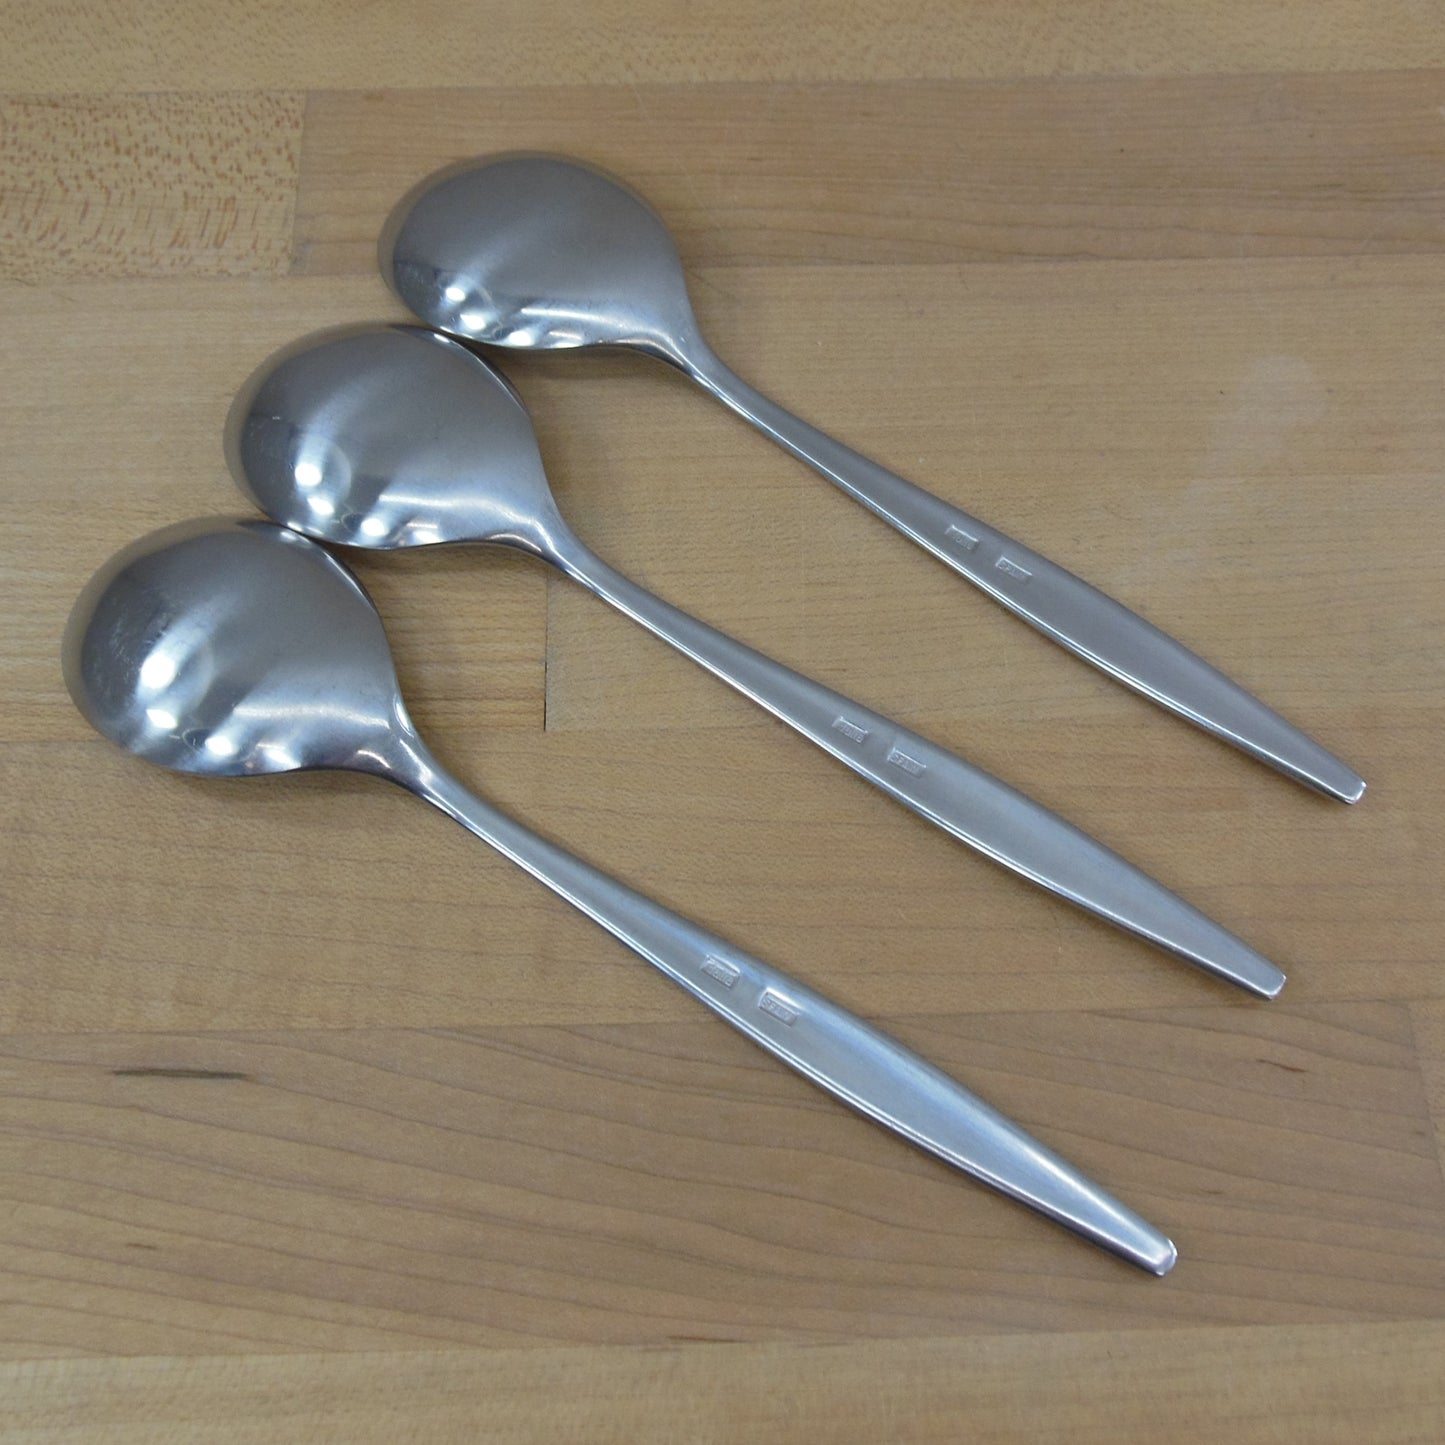 Dalia Spain Braque Modernist Stainless Flatware - 3 Set Place/Soup Spoon Used